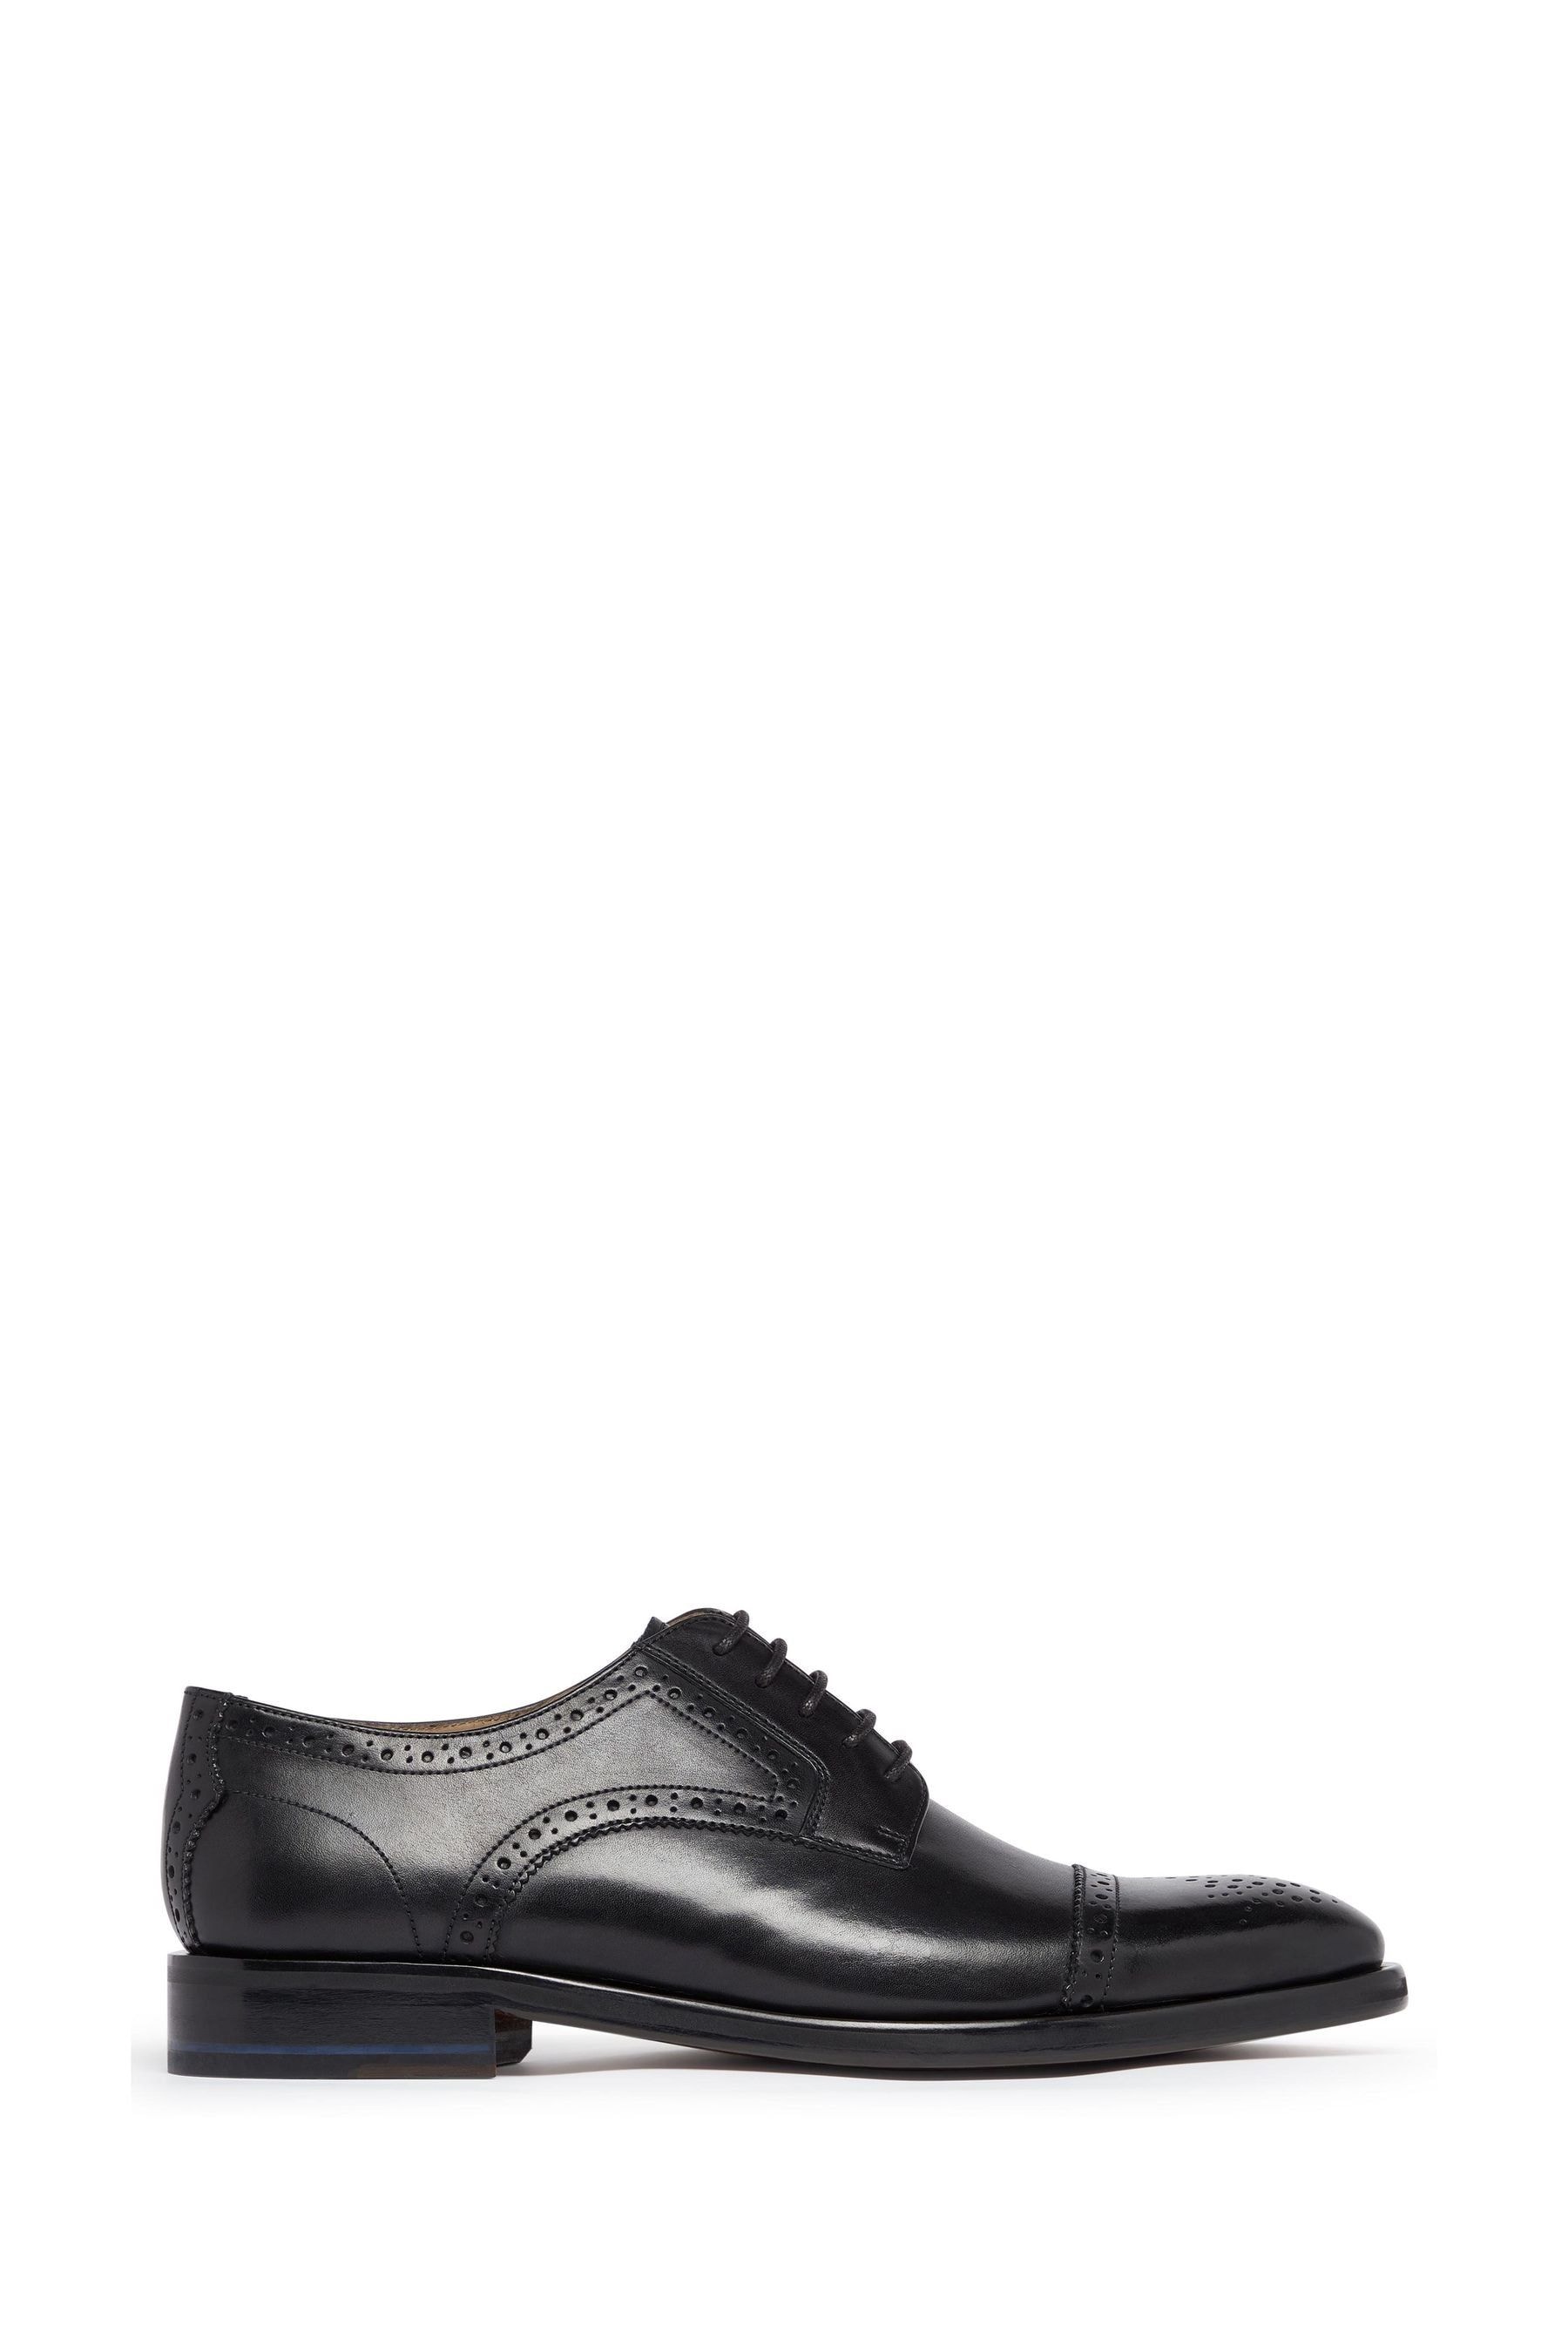 Buy Oliver Sweeney Black Bridgford Polished Leather Derby Brogues from ...